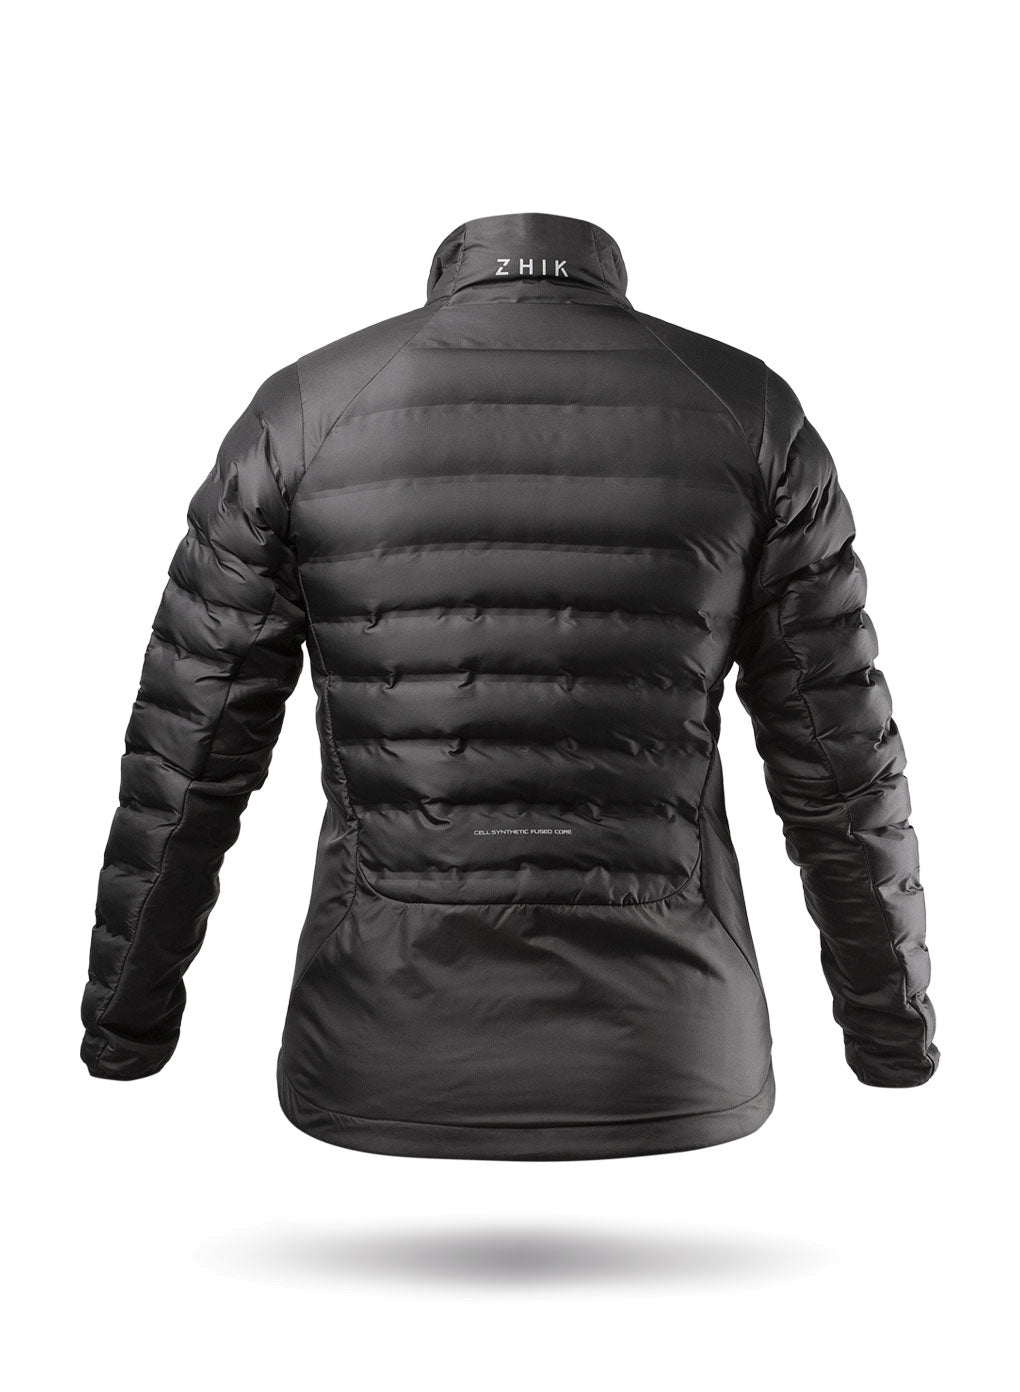 Womens Black Cell Insulated Jacket